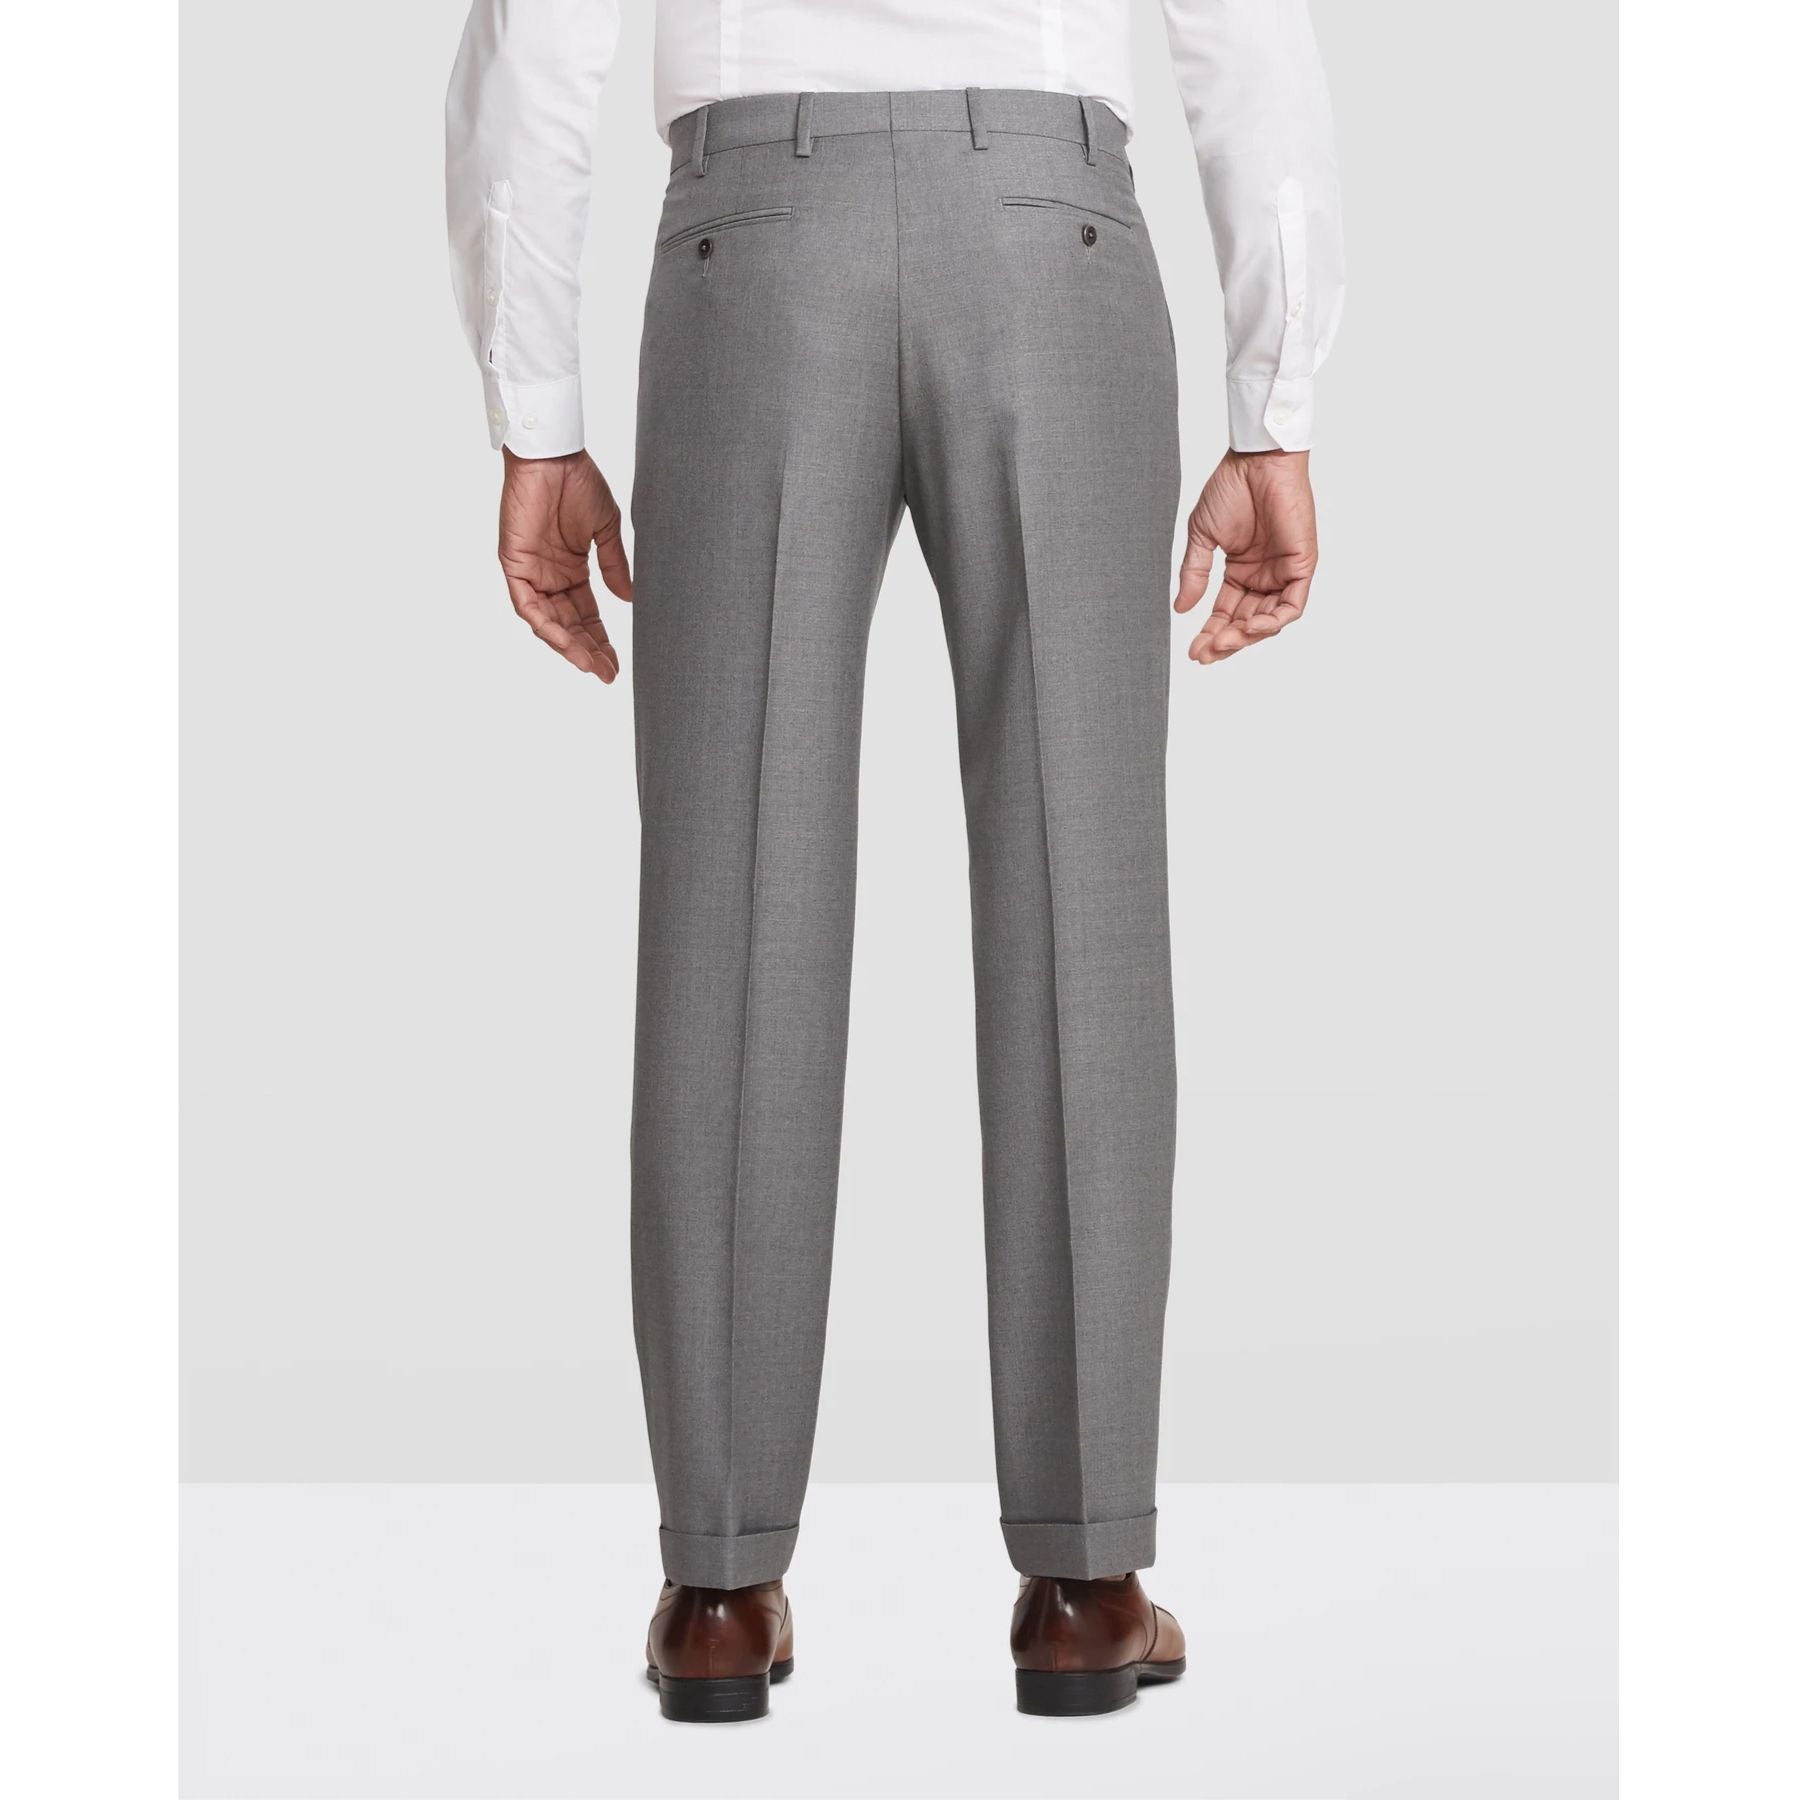 Parker Flat Front Stretch Wool Trouser in Light Grey (Modern Straight Fit) by Zanella